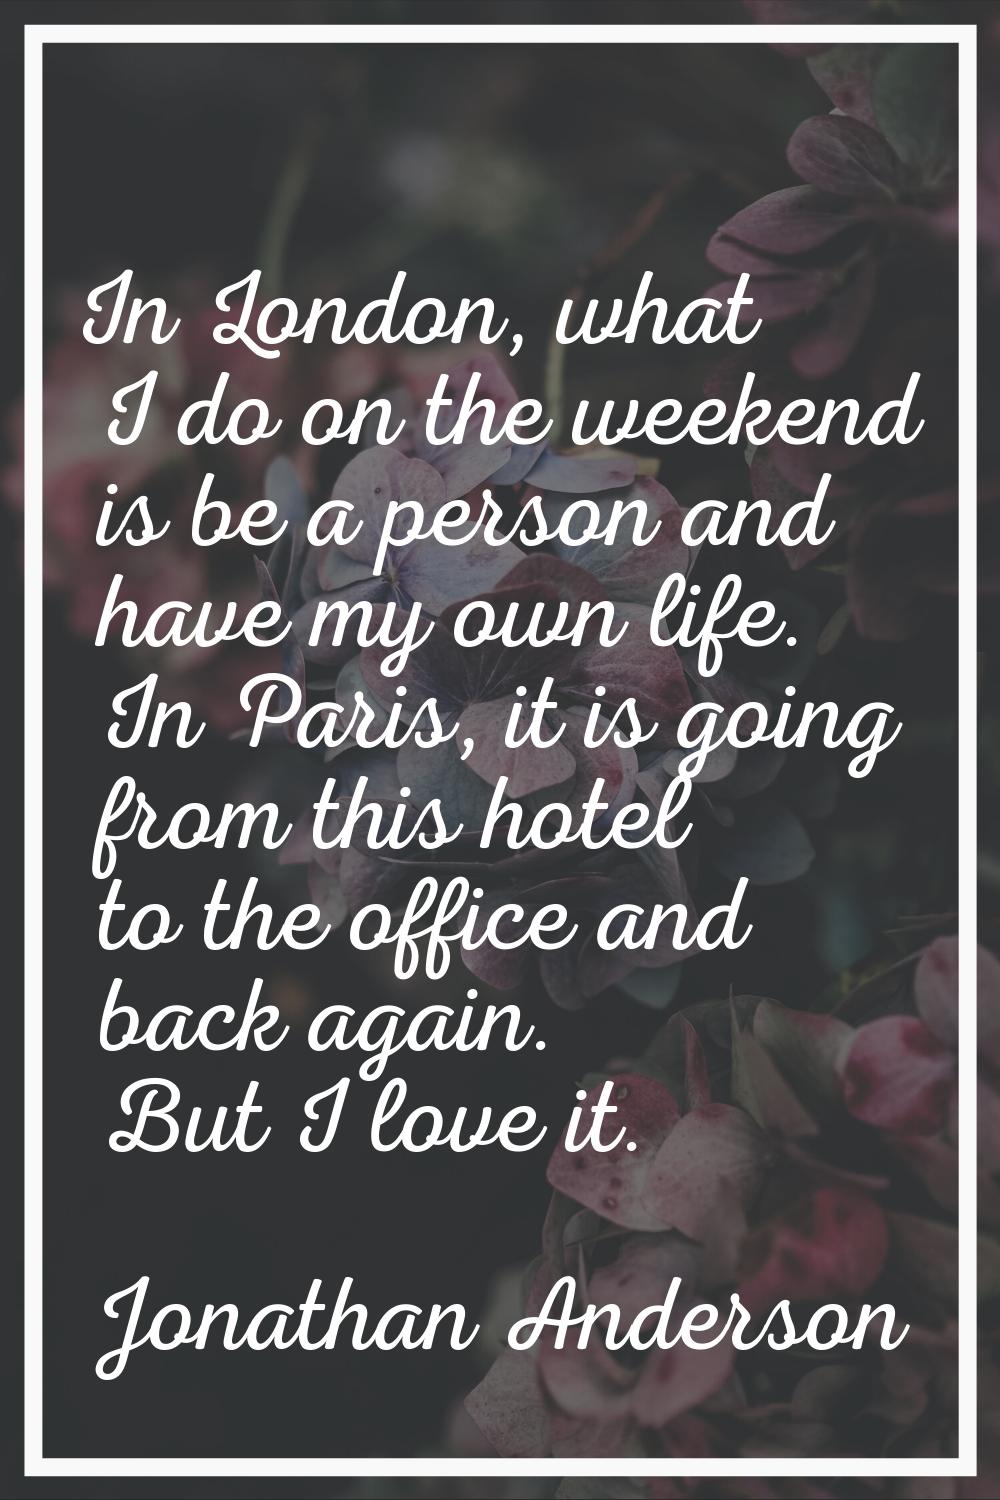 In London, what I do on the weekend is be a person and have my own life. In Paris, it is going from